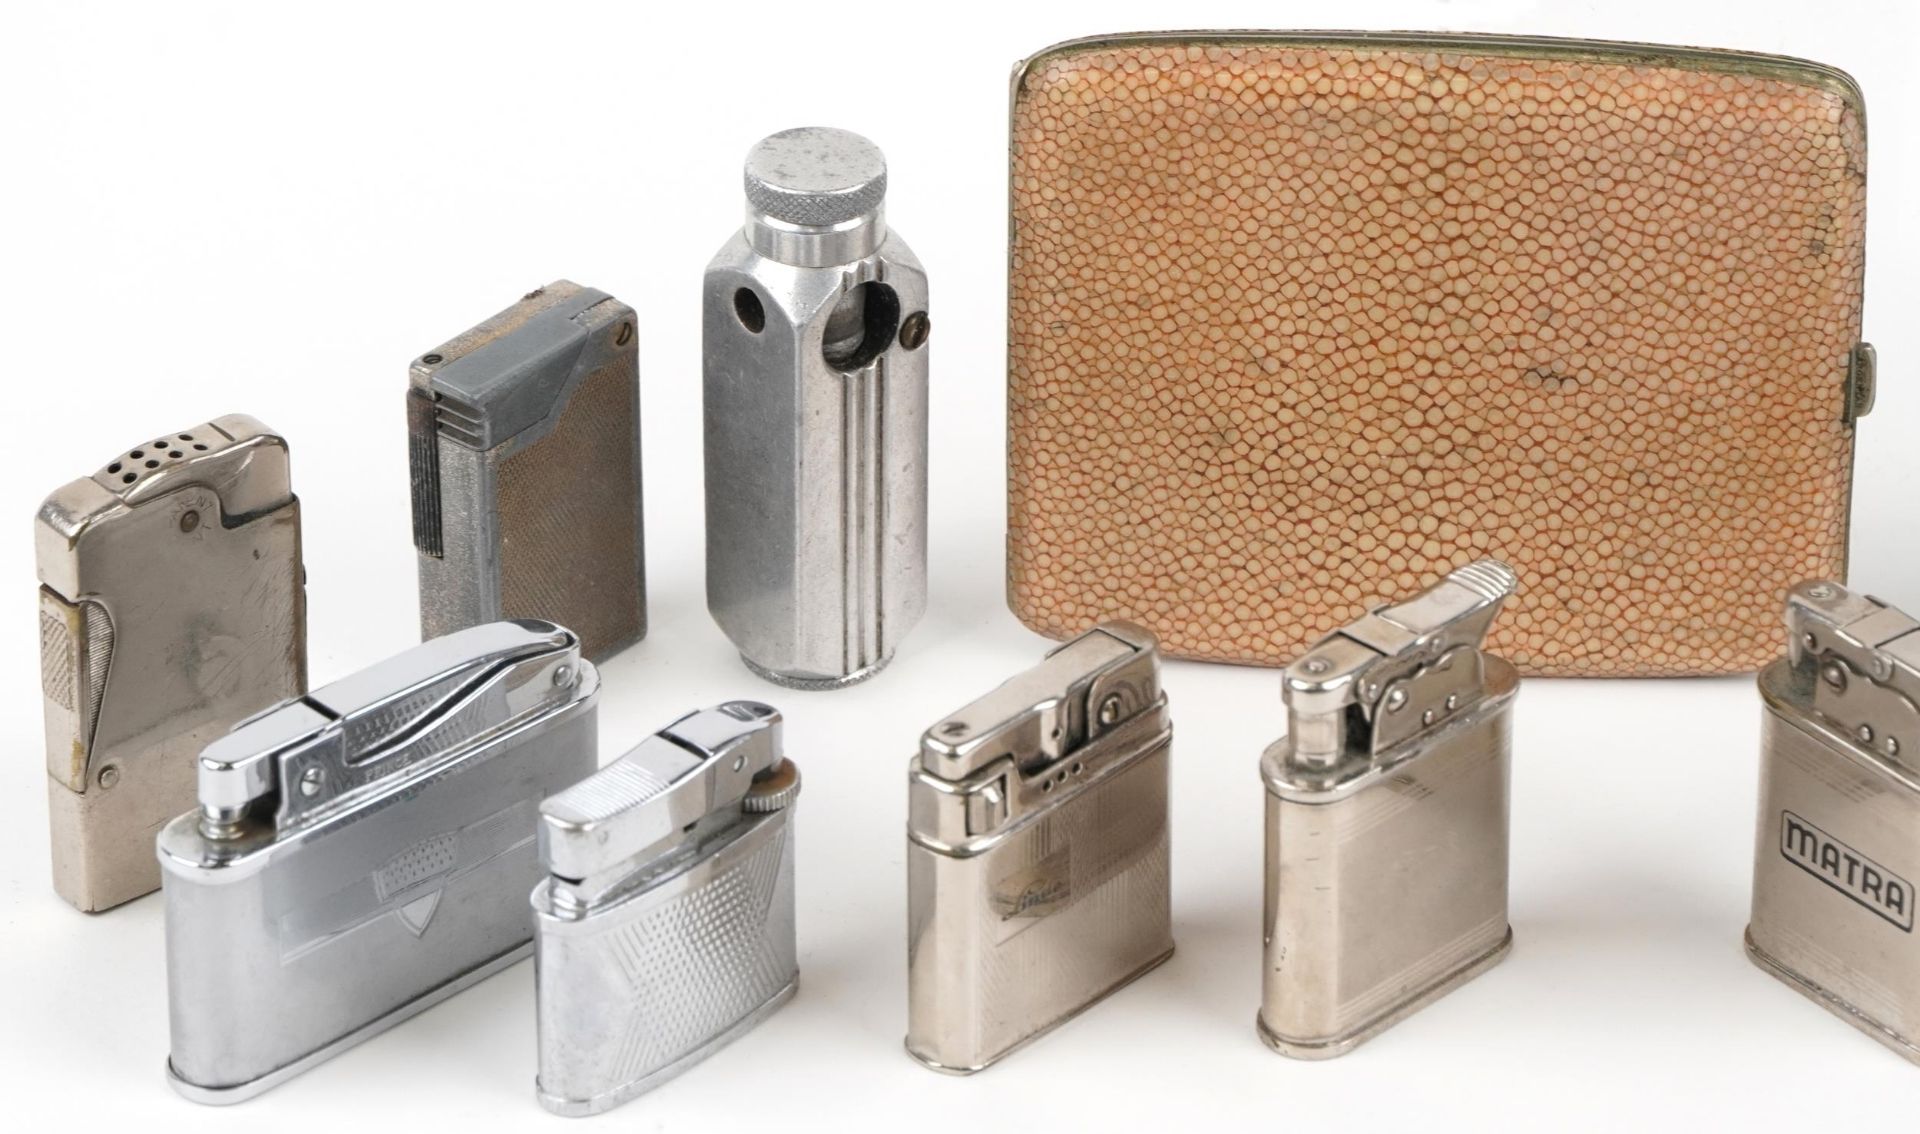 Vintage smoking collectables including a shagreen cigarette case, Flambeau Flamidor lighter and - Image 2 of 3